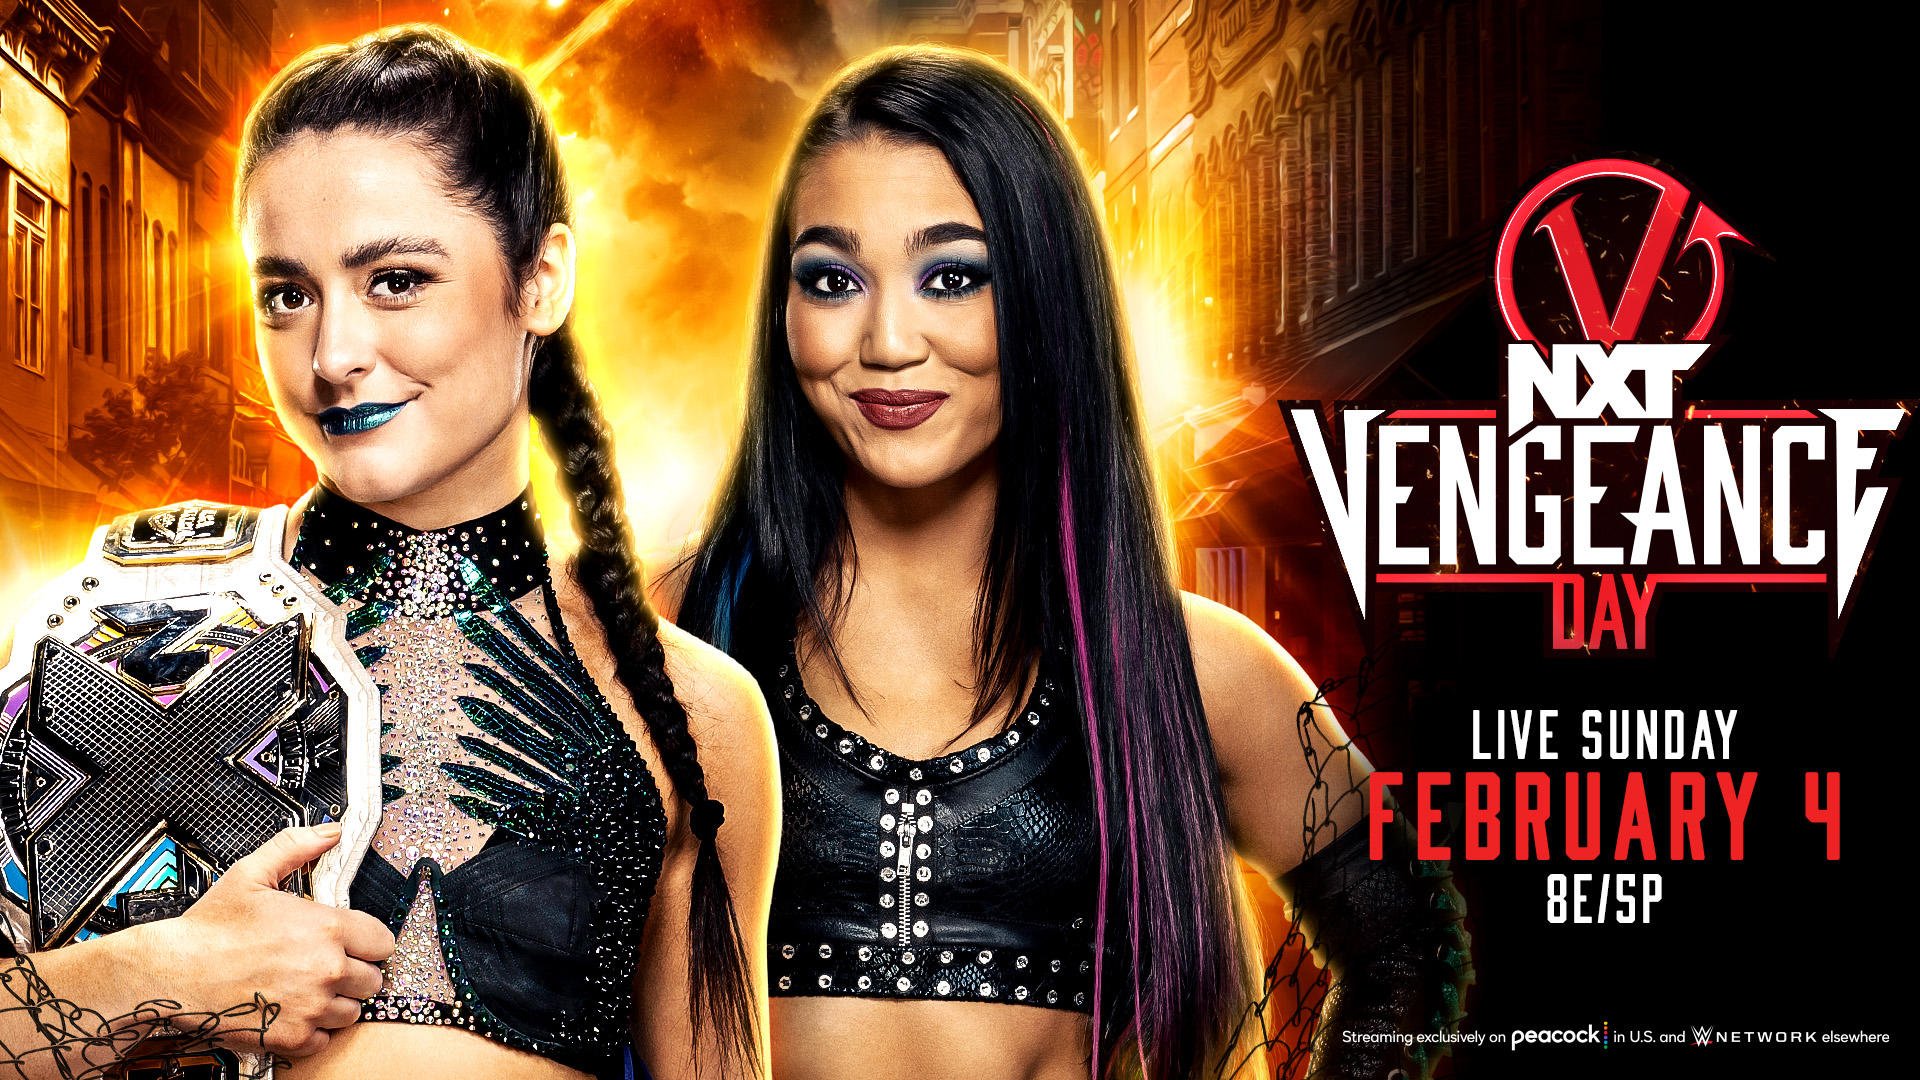 Lyria Valkyria Prepares for a Serious Match Against Roxanne Perez at WWE NXT: Vengeance Day